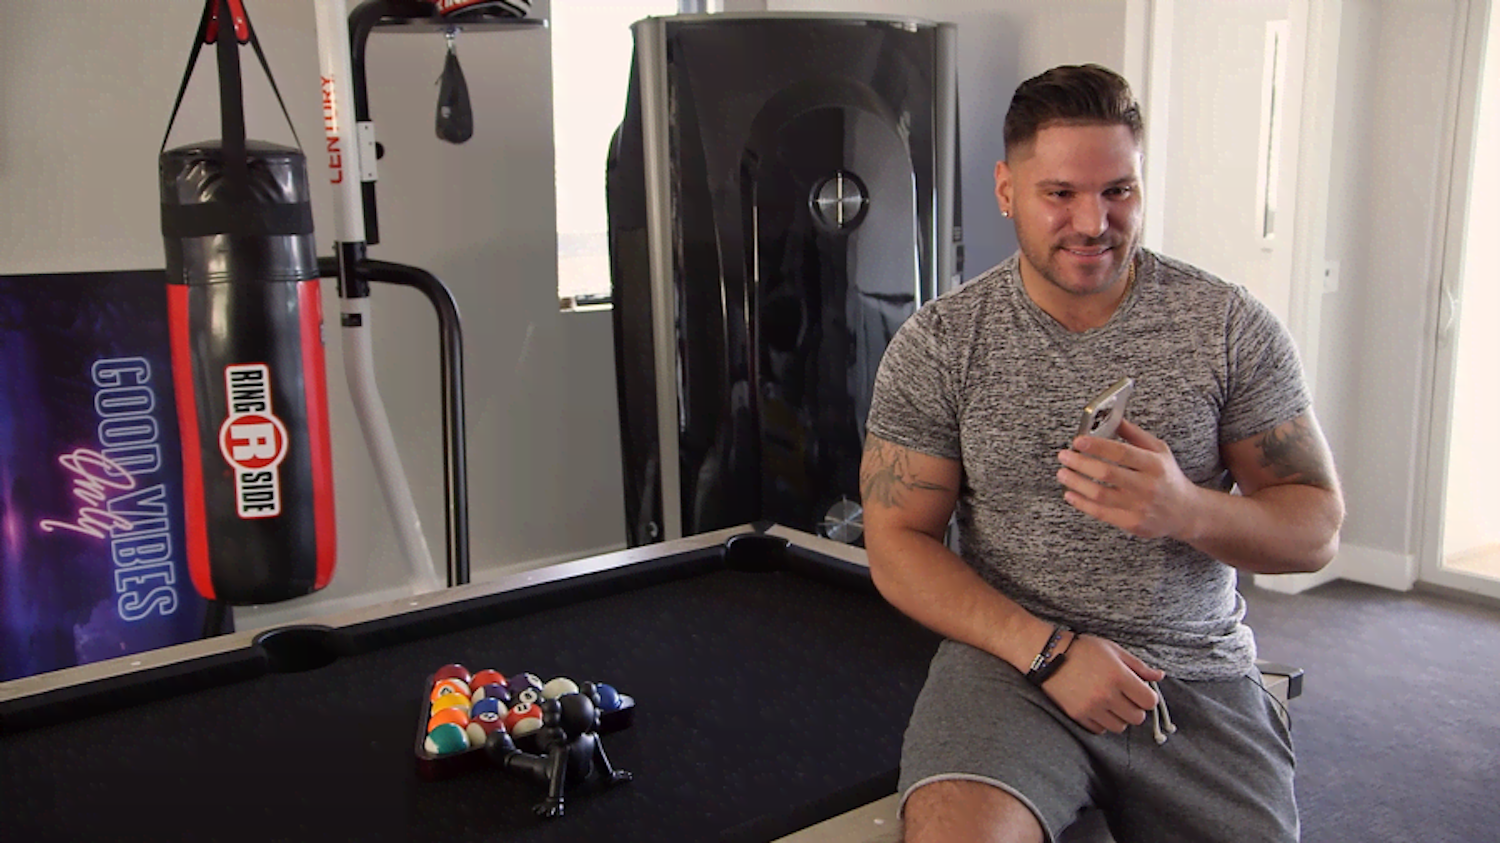 Ronnie Ortiz-Magro sits on a pool table in 'The Meatball Show' episode of 'Jersey Shore: Family Vacation'